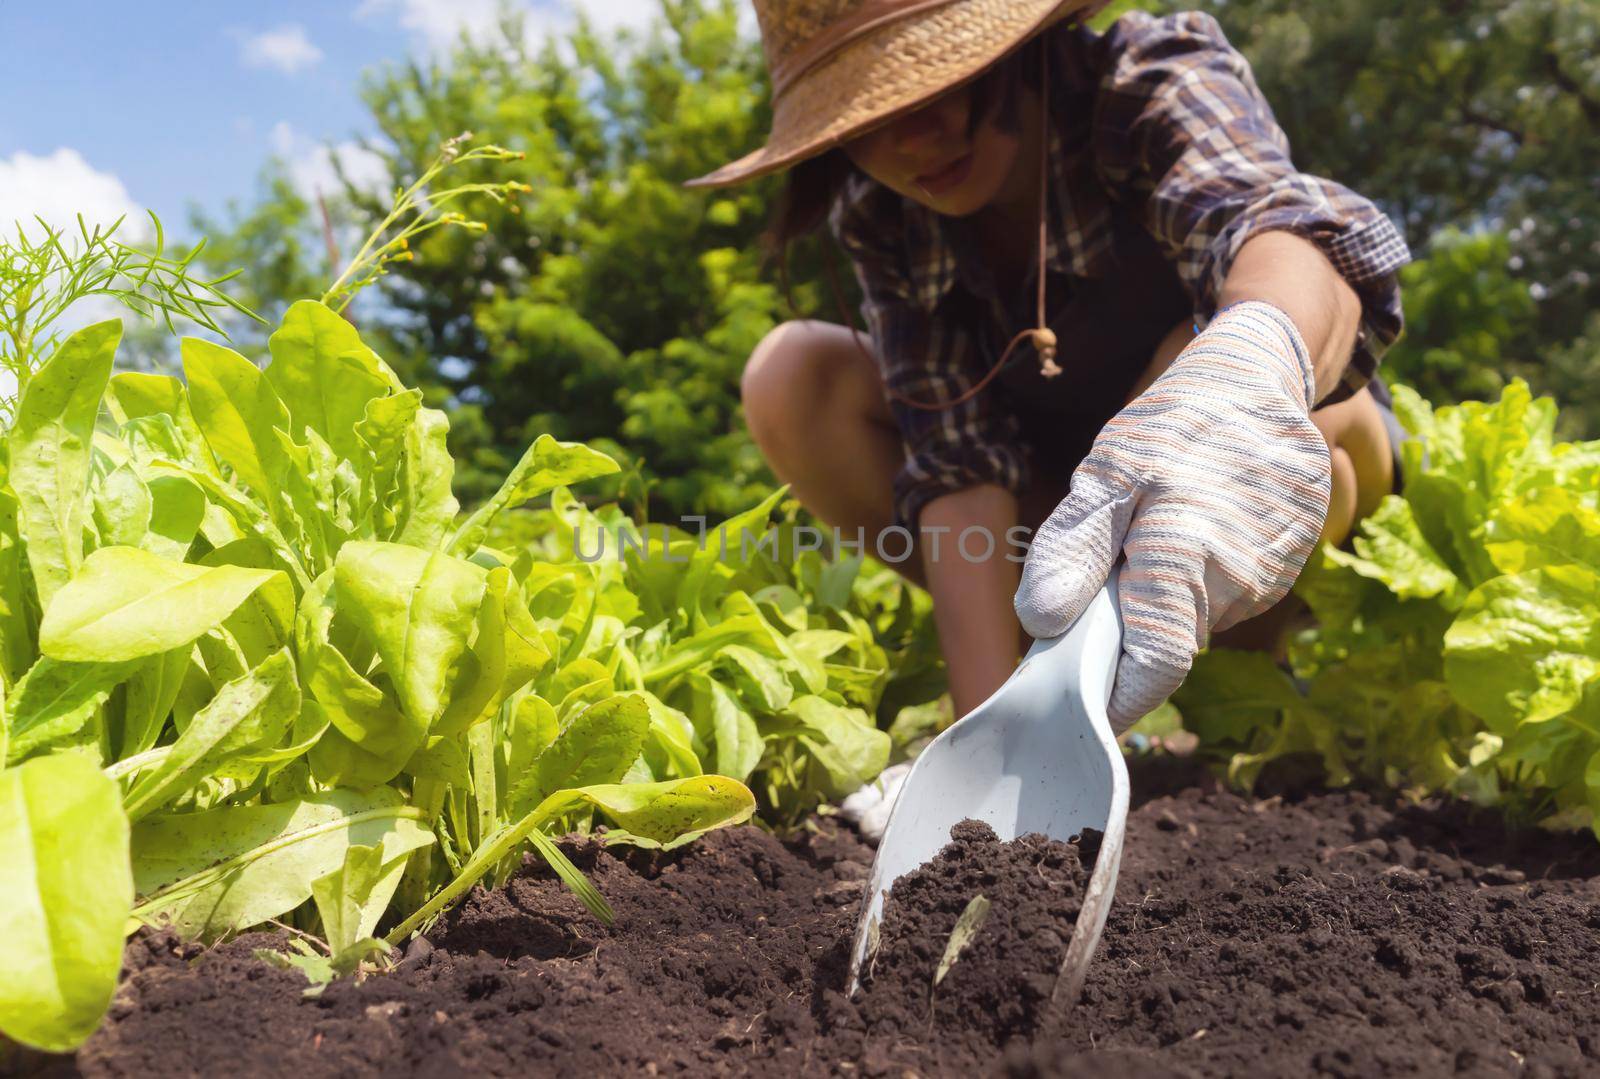 A young girl in gloves prepares the soil in the garden for planting seedlings. by africapink